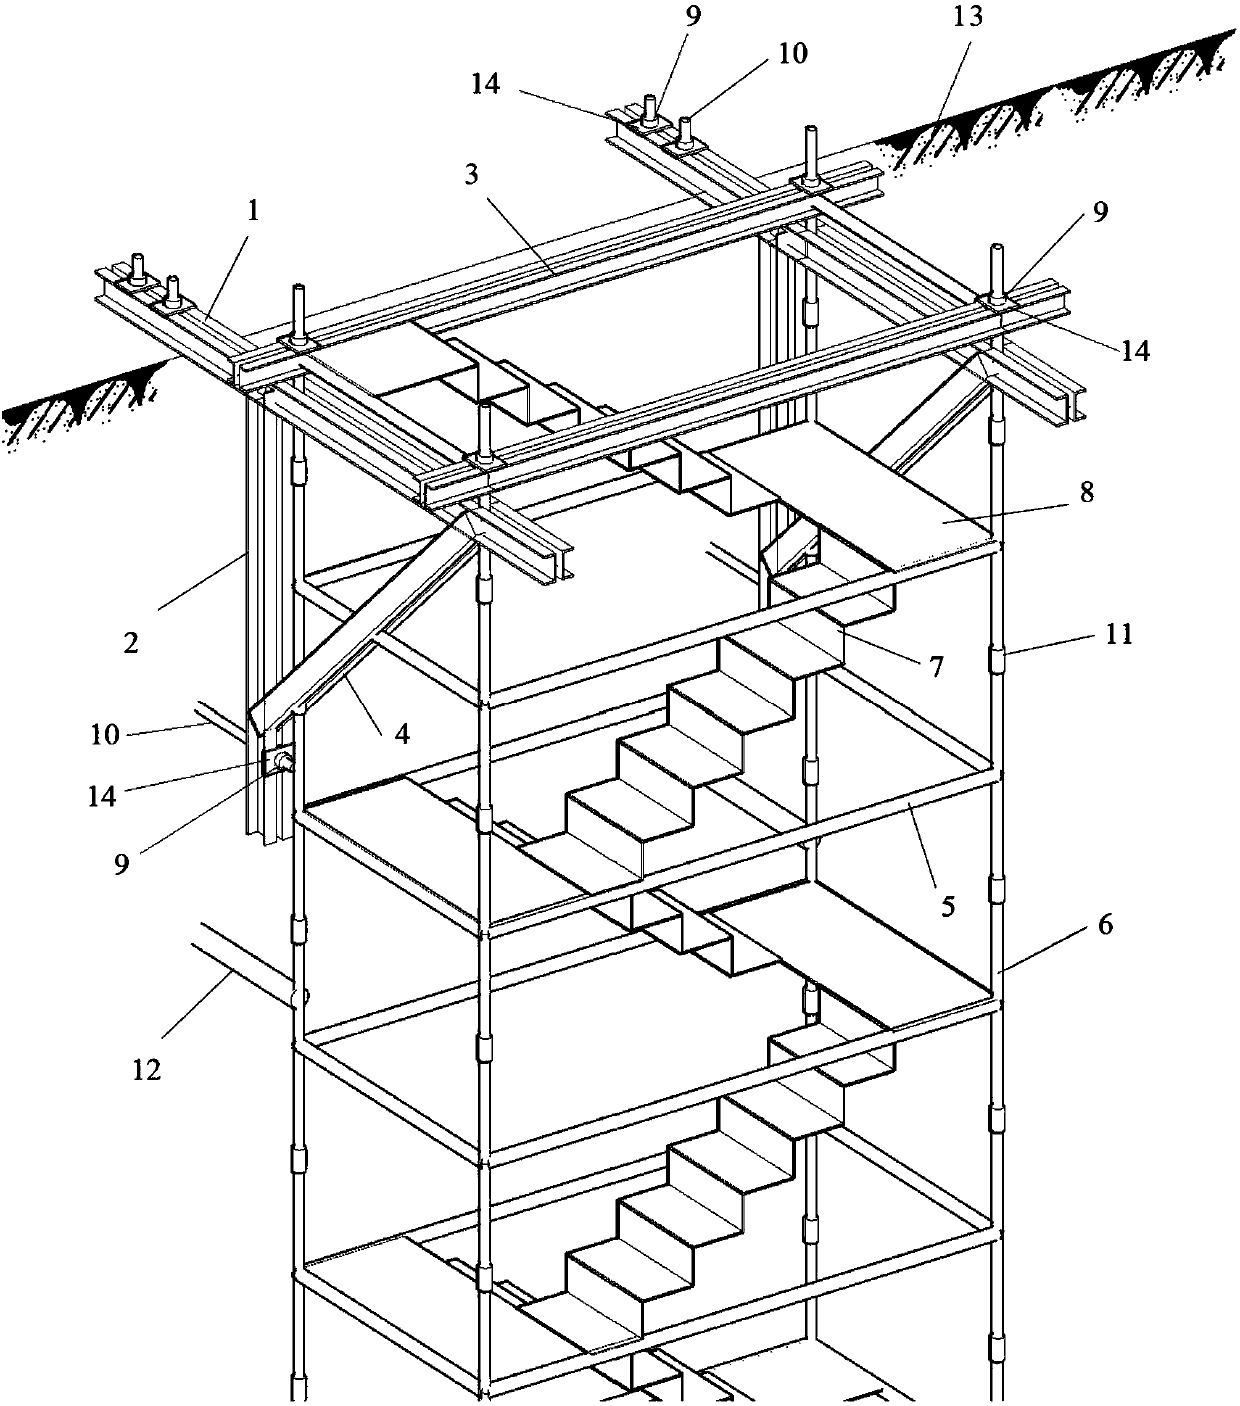 Hanging channel device for foundation pit